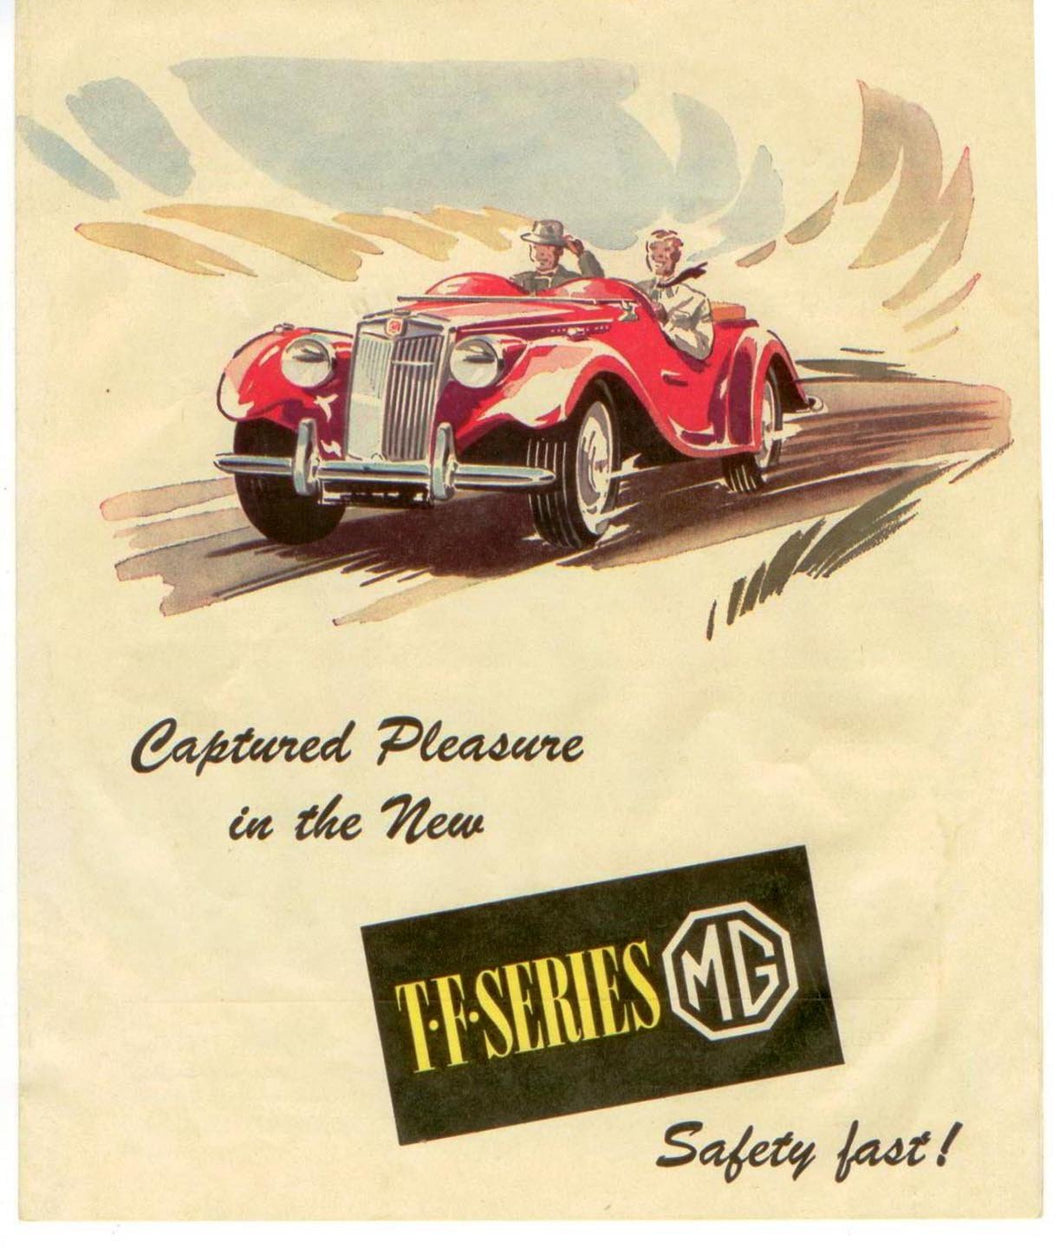 Captured Pleasure in the New T.F. Series MG